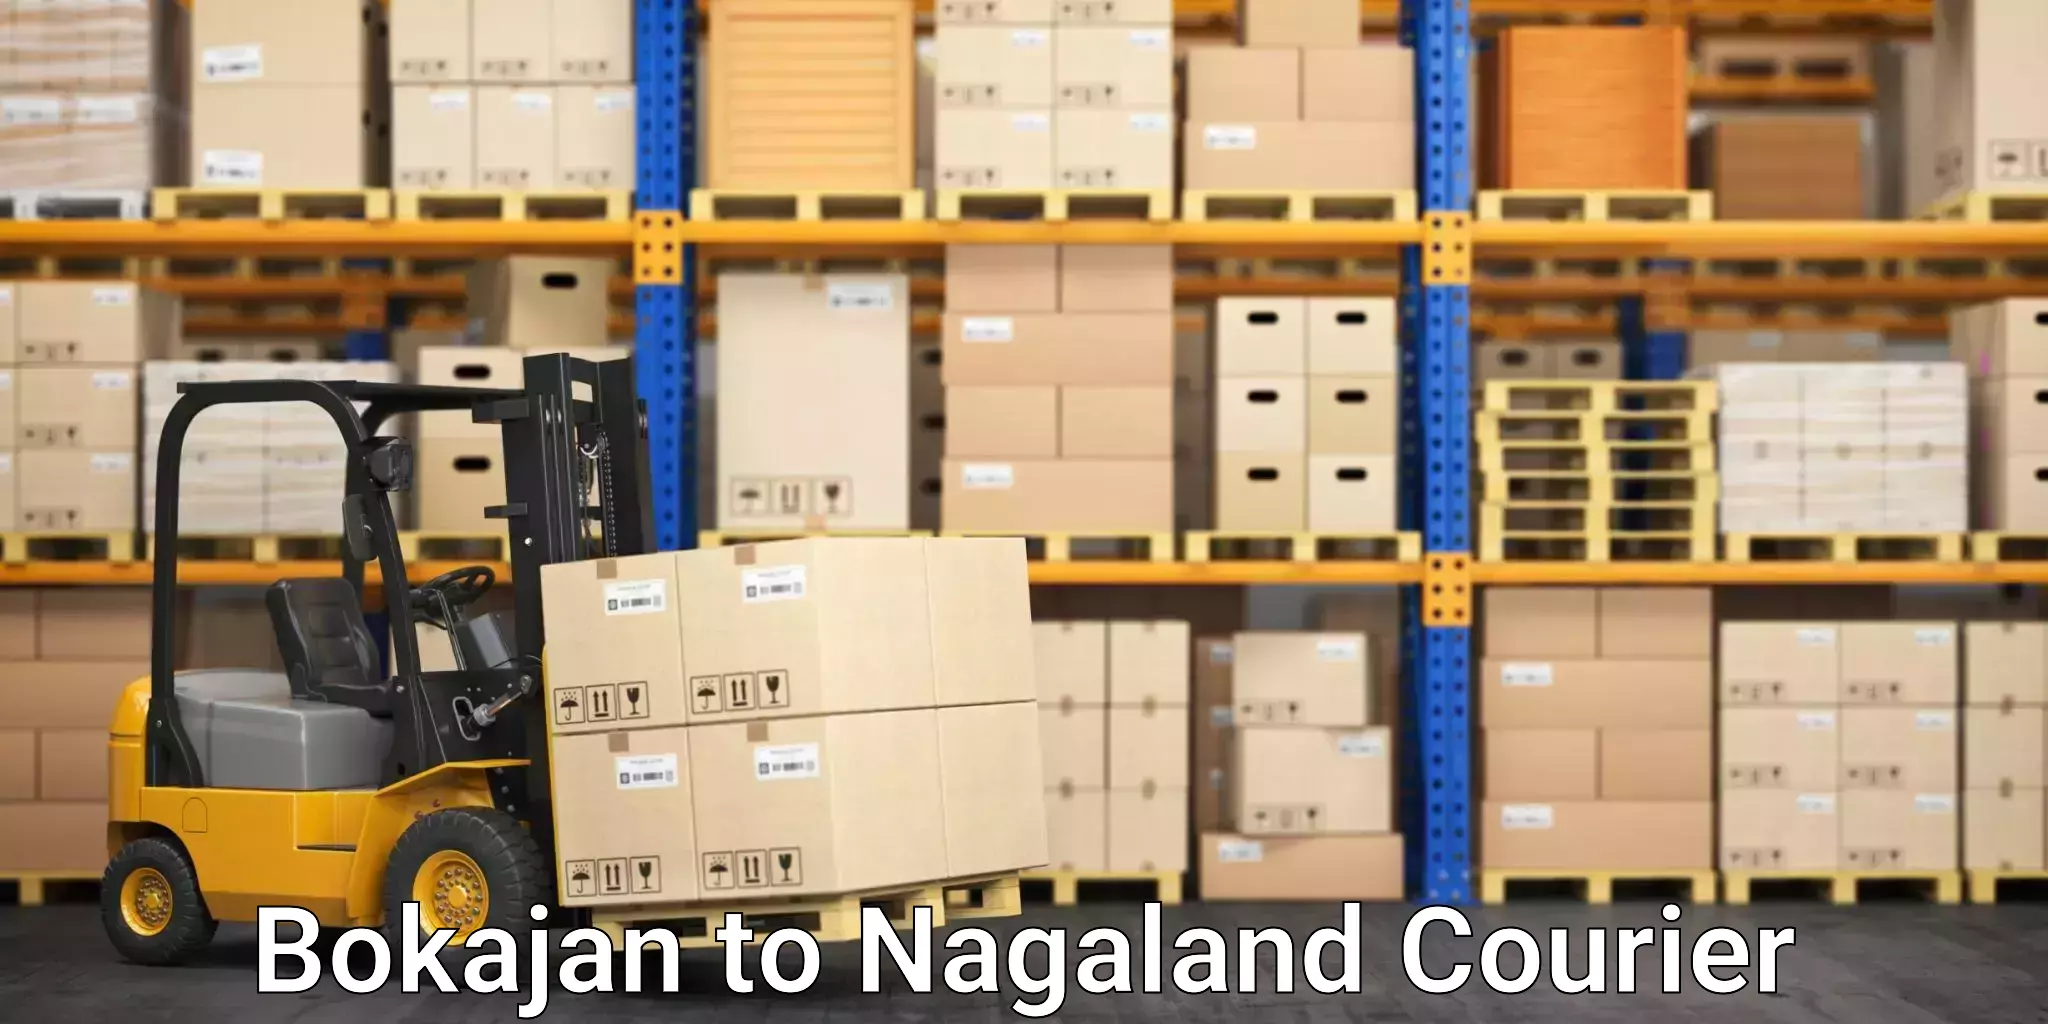 Express package services in Bokajan to Nagaland